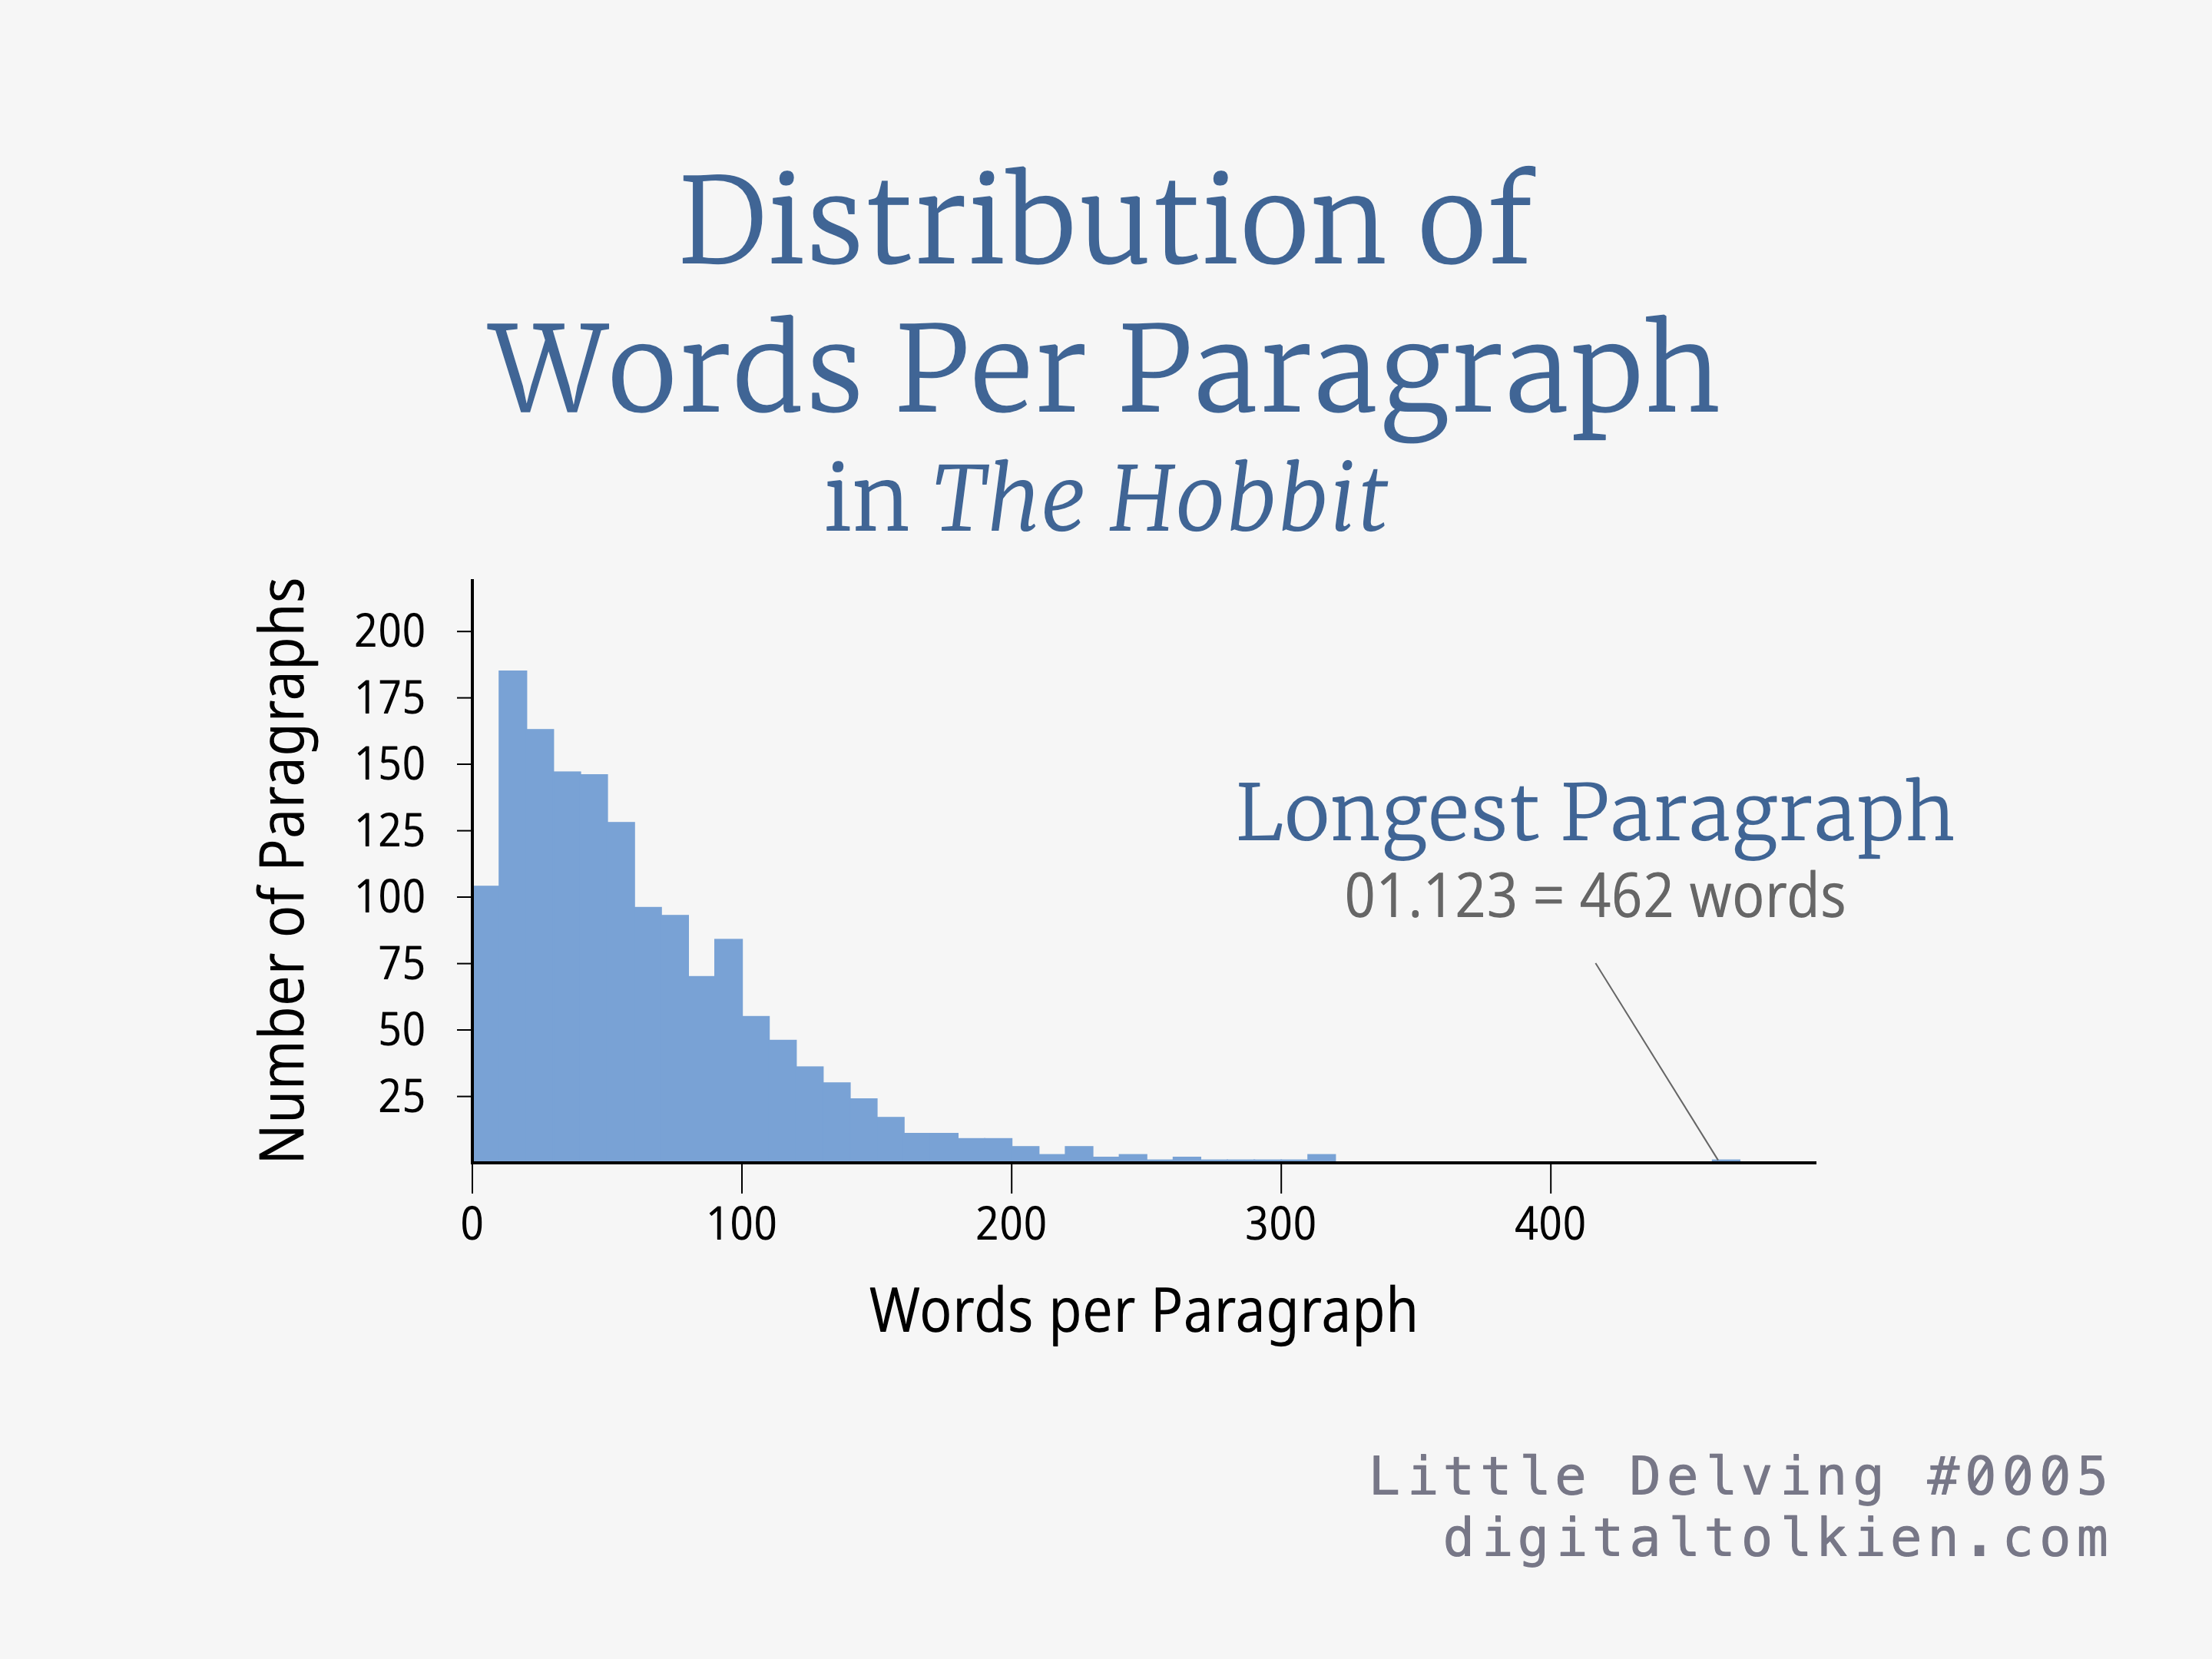 Distribution of Words Per Paragraph in The Hobbit
        Histogram showing number of paragraphs with a given number of words.
        The longest paragraph is 01.123 with 462 words.
        Little Delving #0005
        digitaltolkien.com